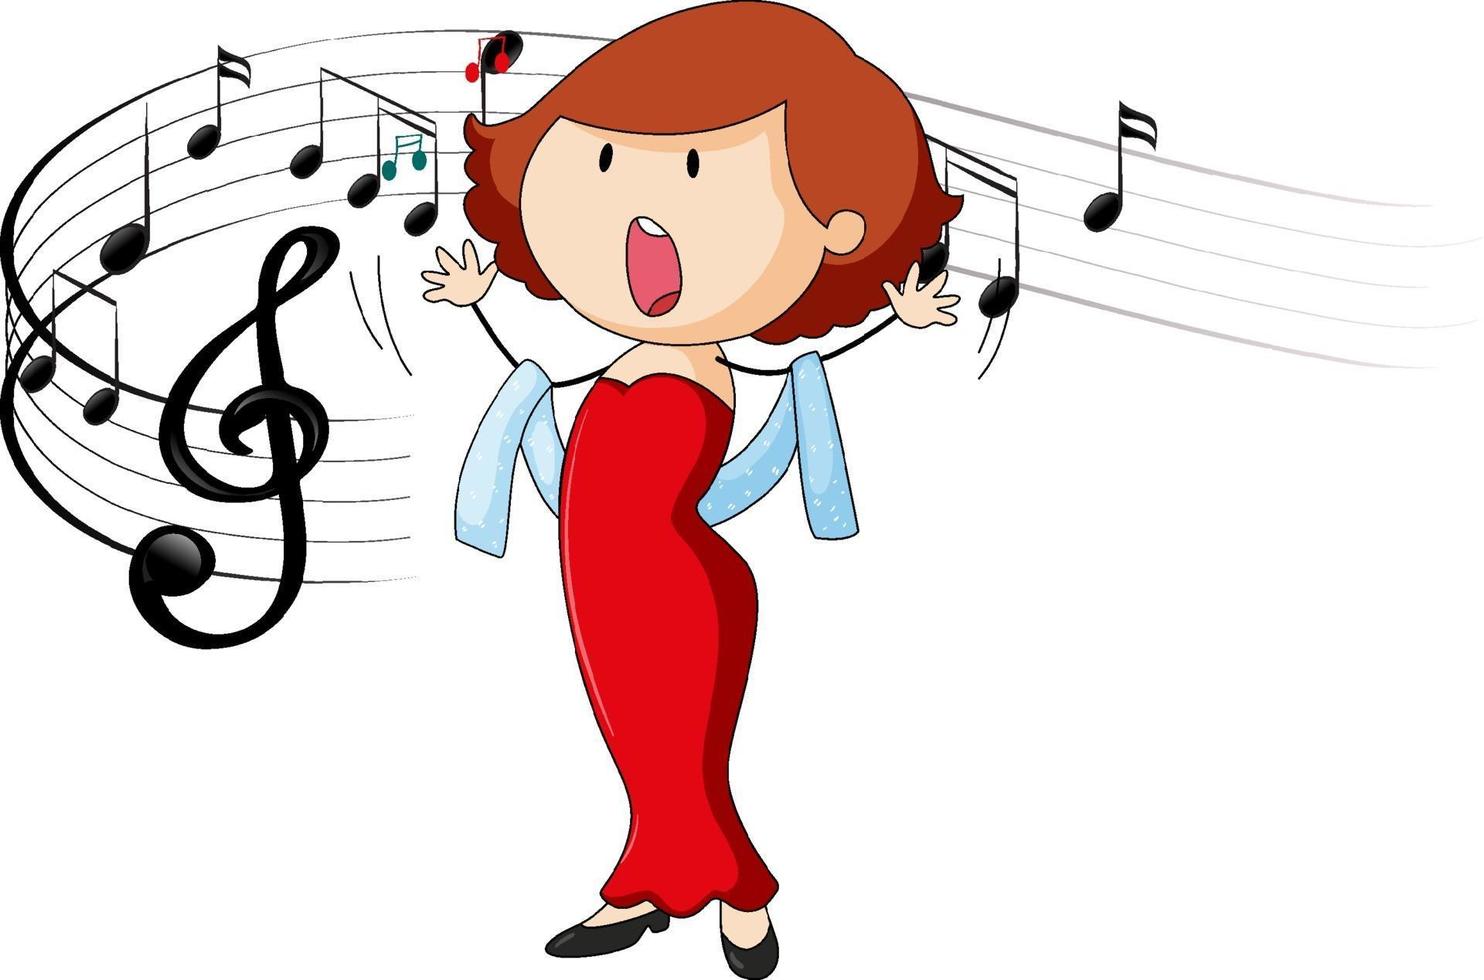 Doodle cartoon character of a singer woman singing with melody symbols vector